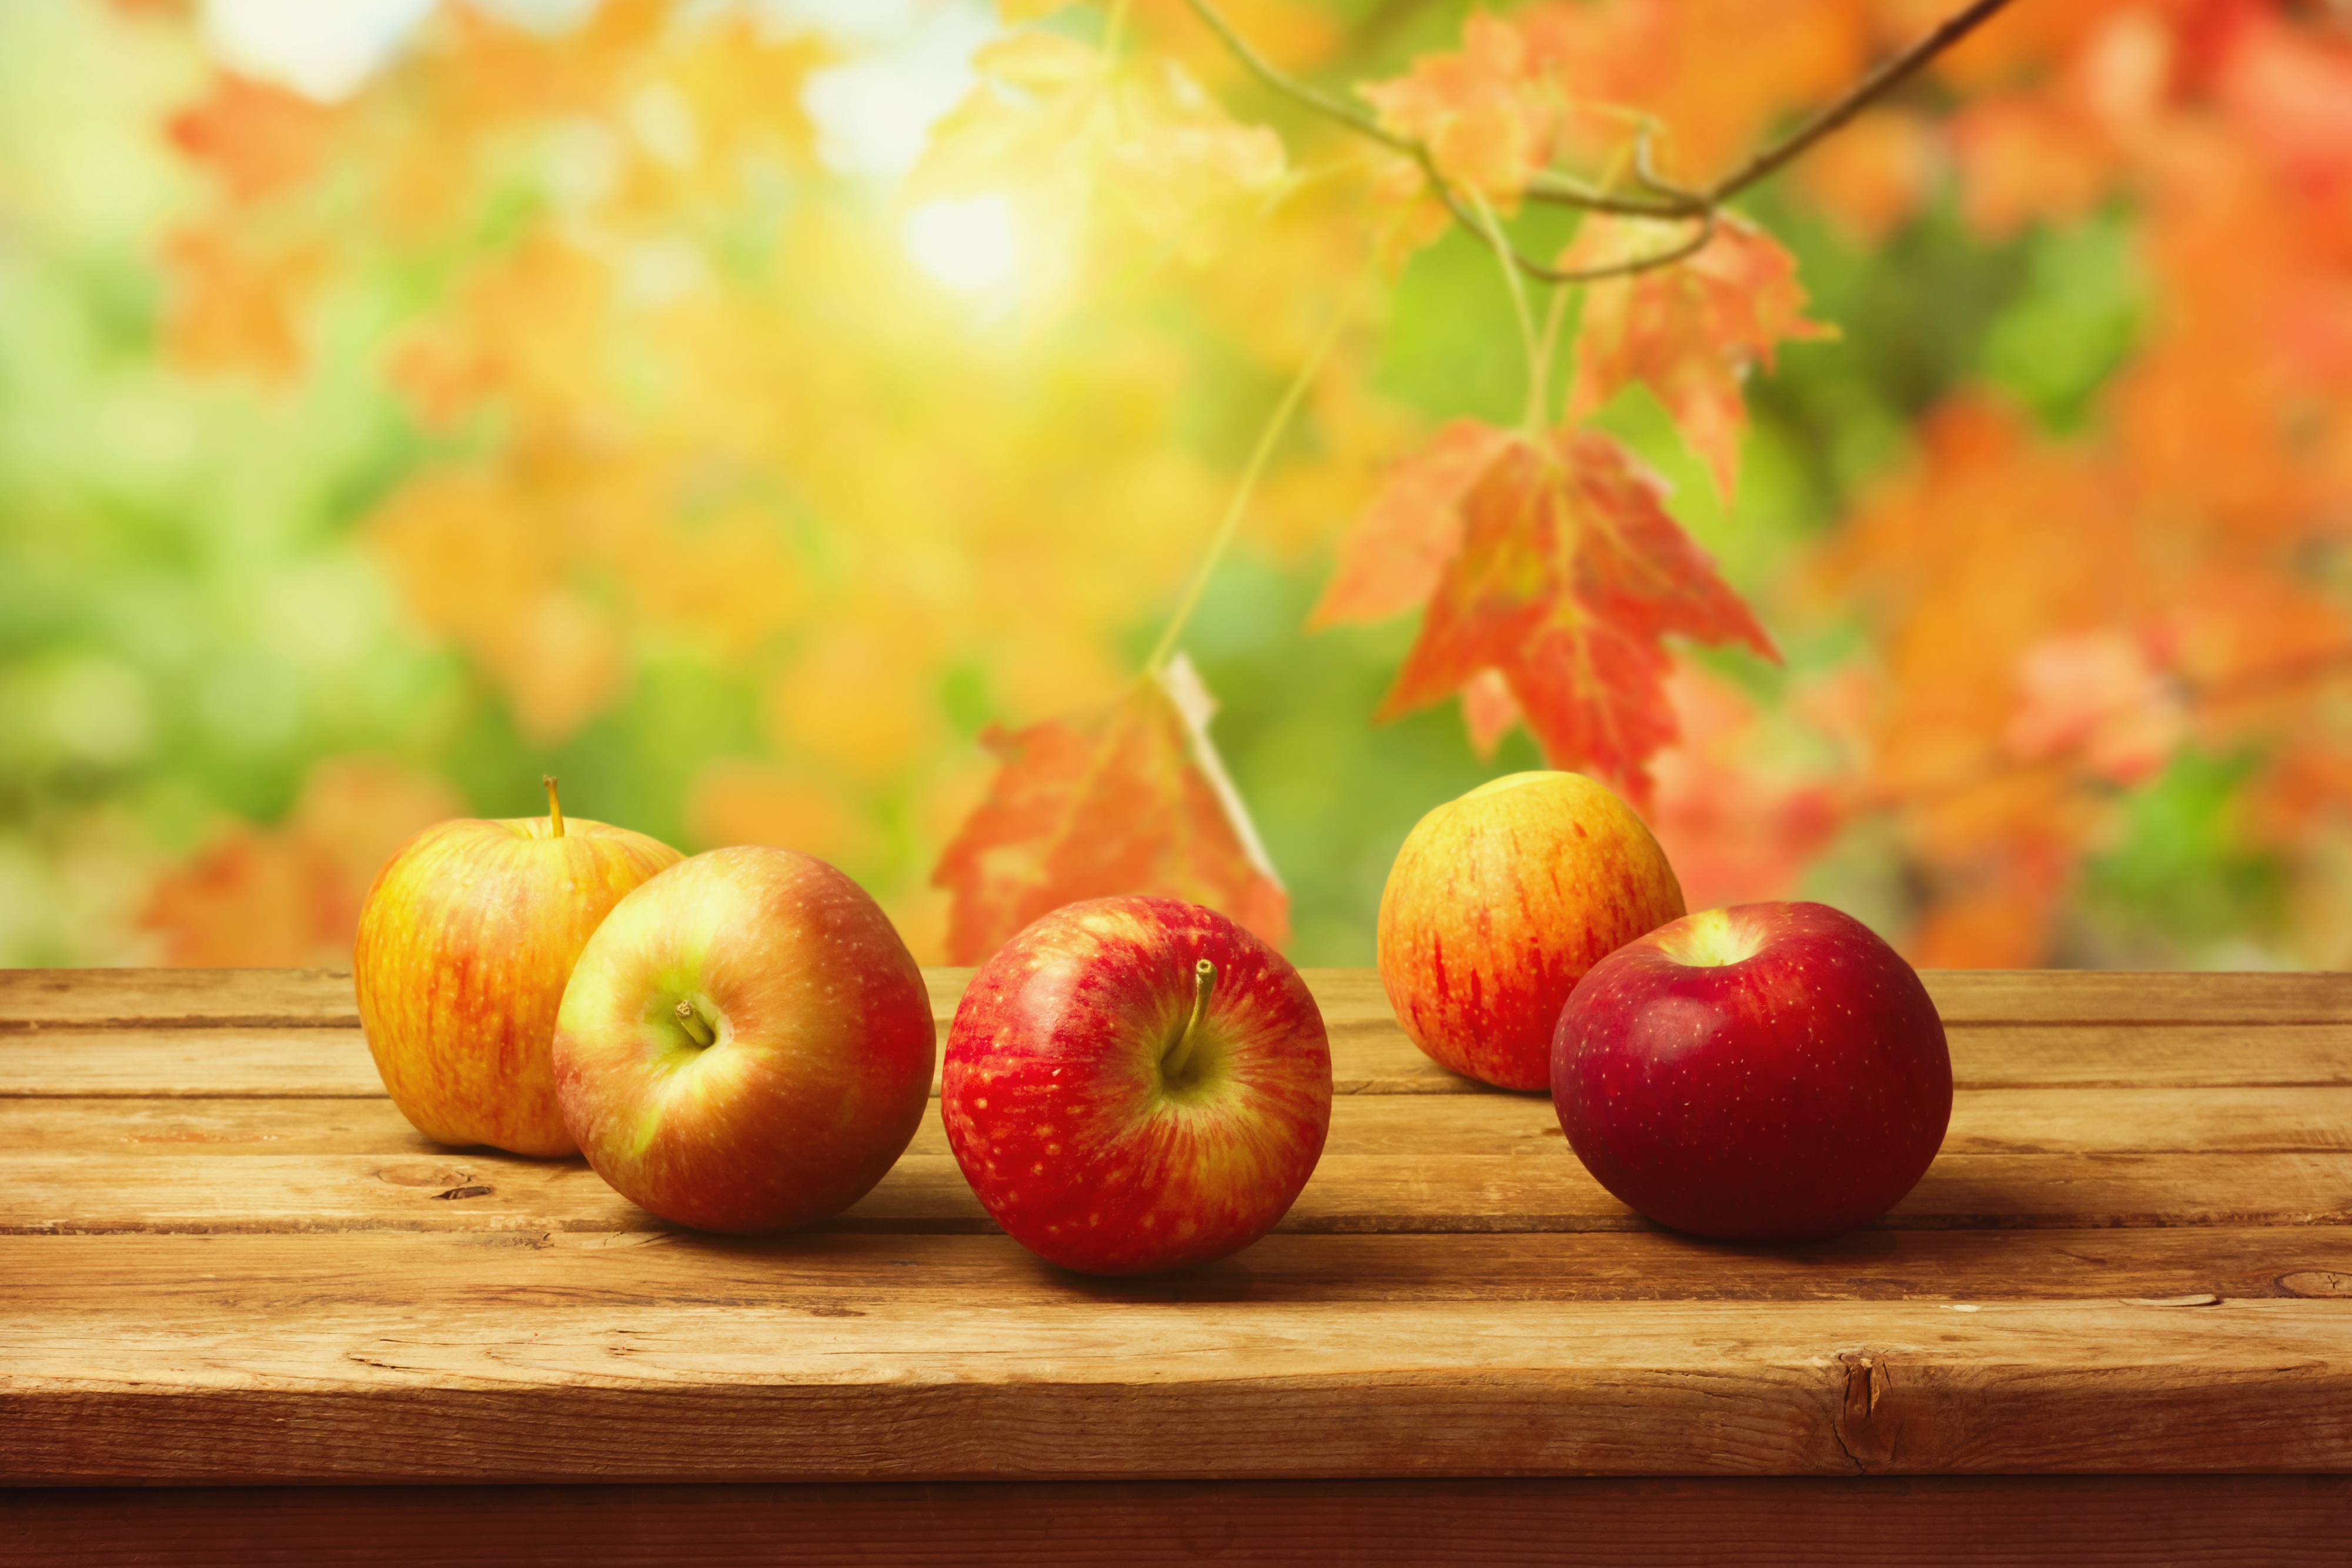 Fall Background With Apples Gallery Yopriceville High Quality